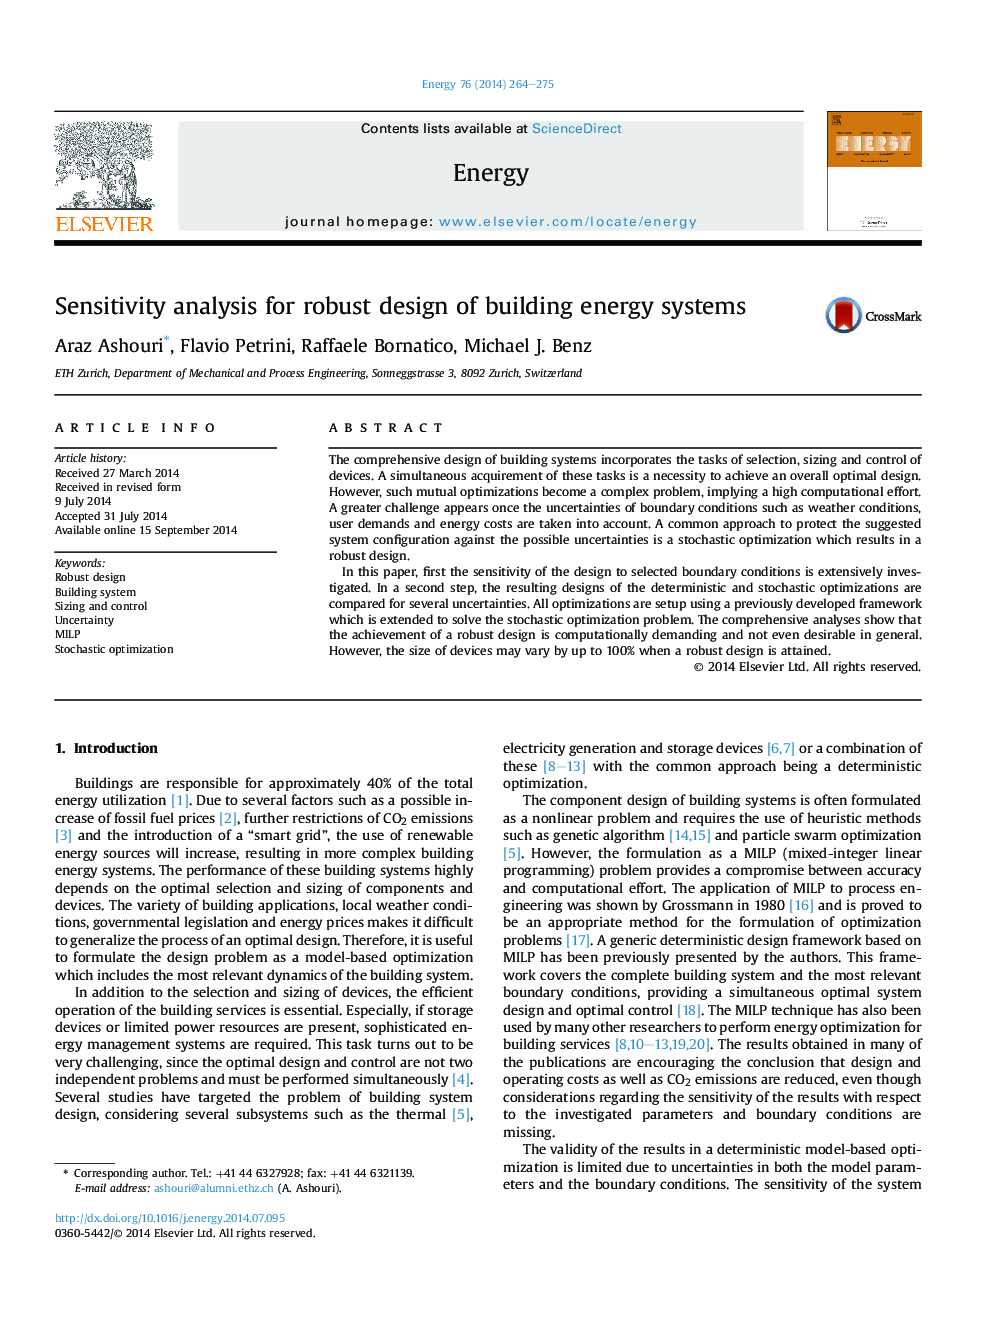 Sensitivity analysis for robust design of building energy systems